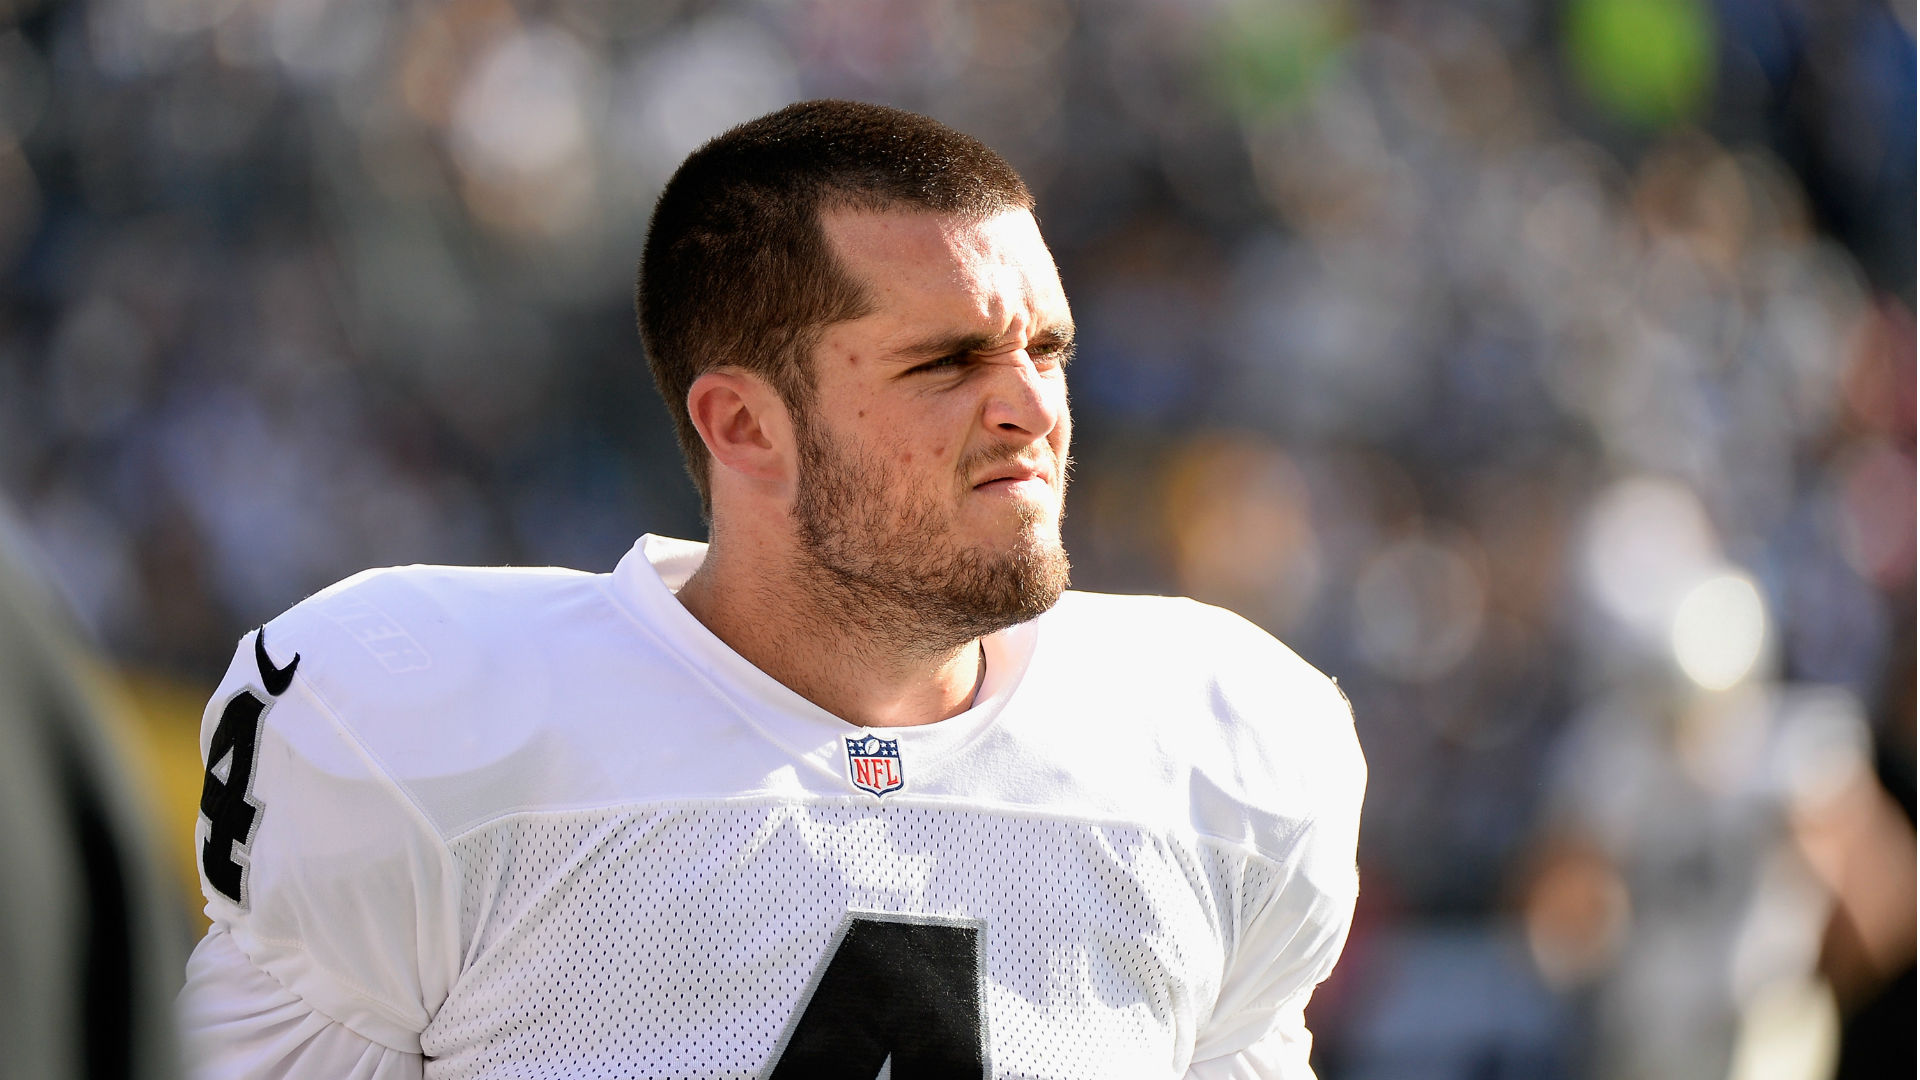 Raiders' Derek Carr upset Dolphins' William Hayes tore ACL: 'Nobody wants that'